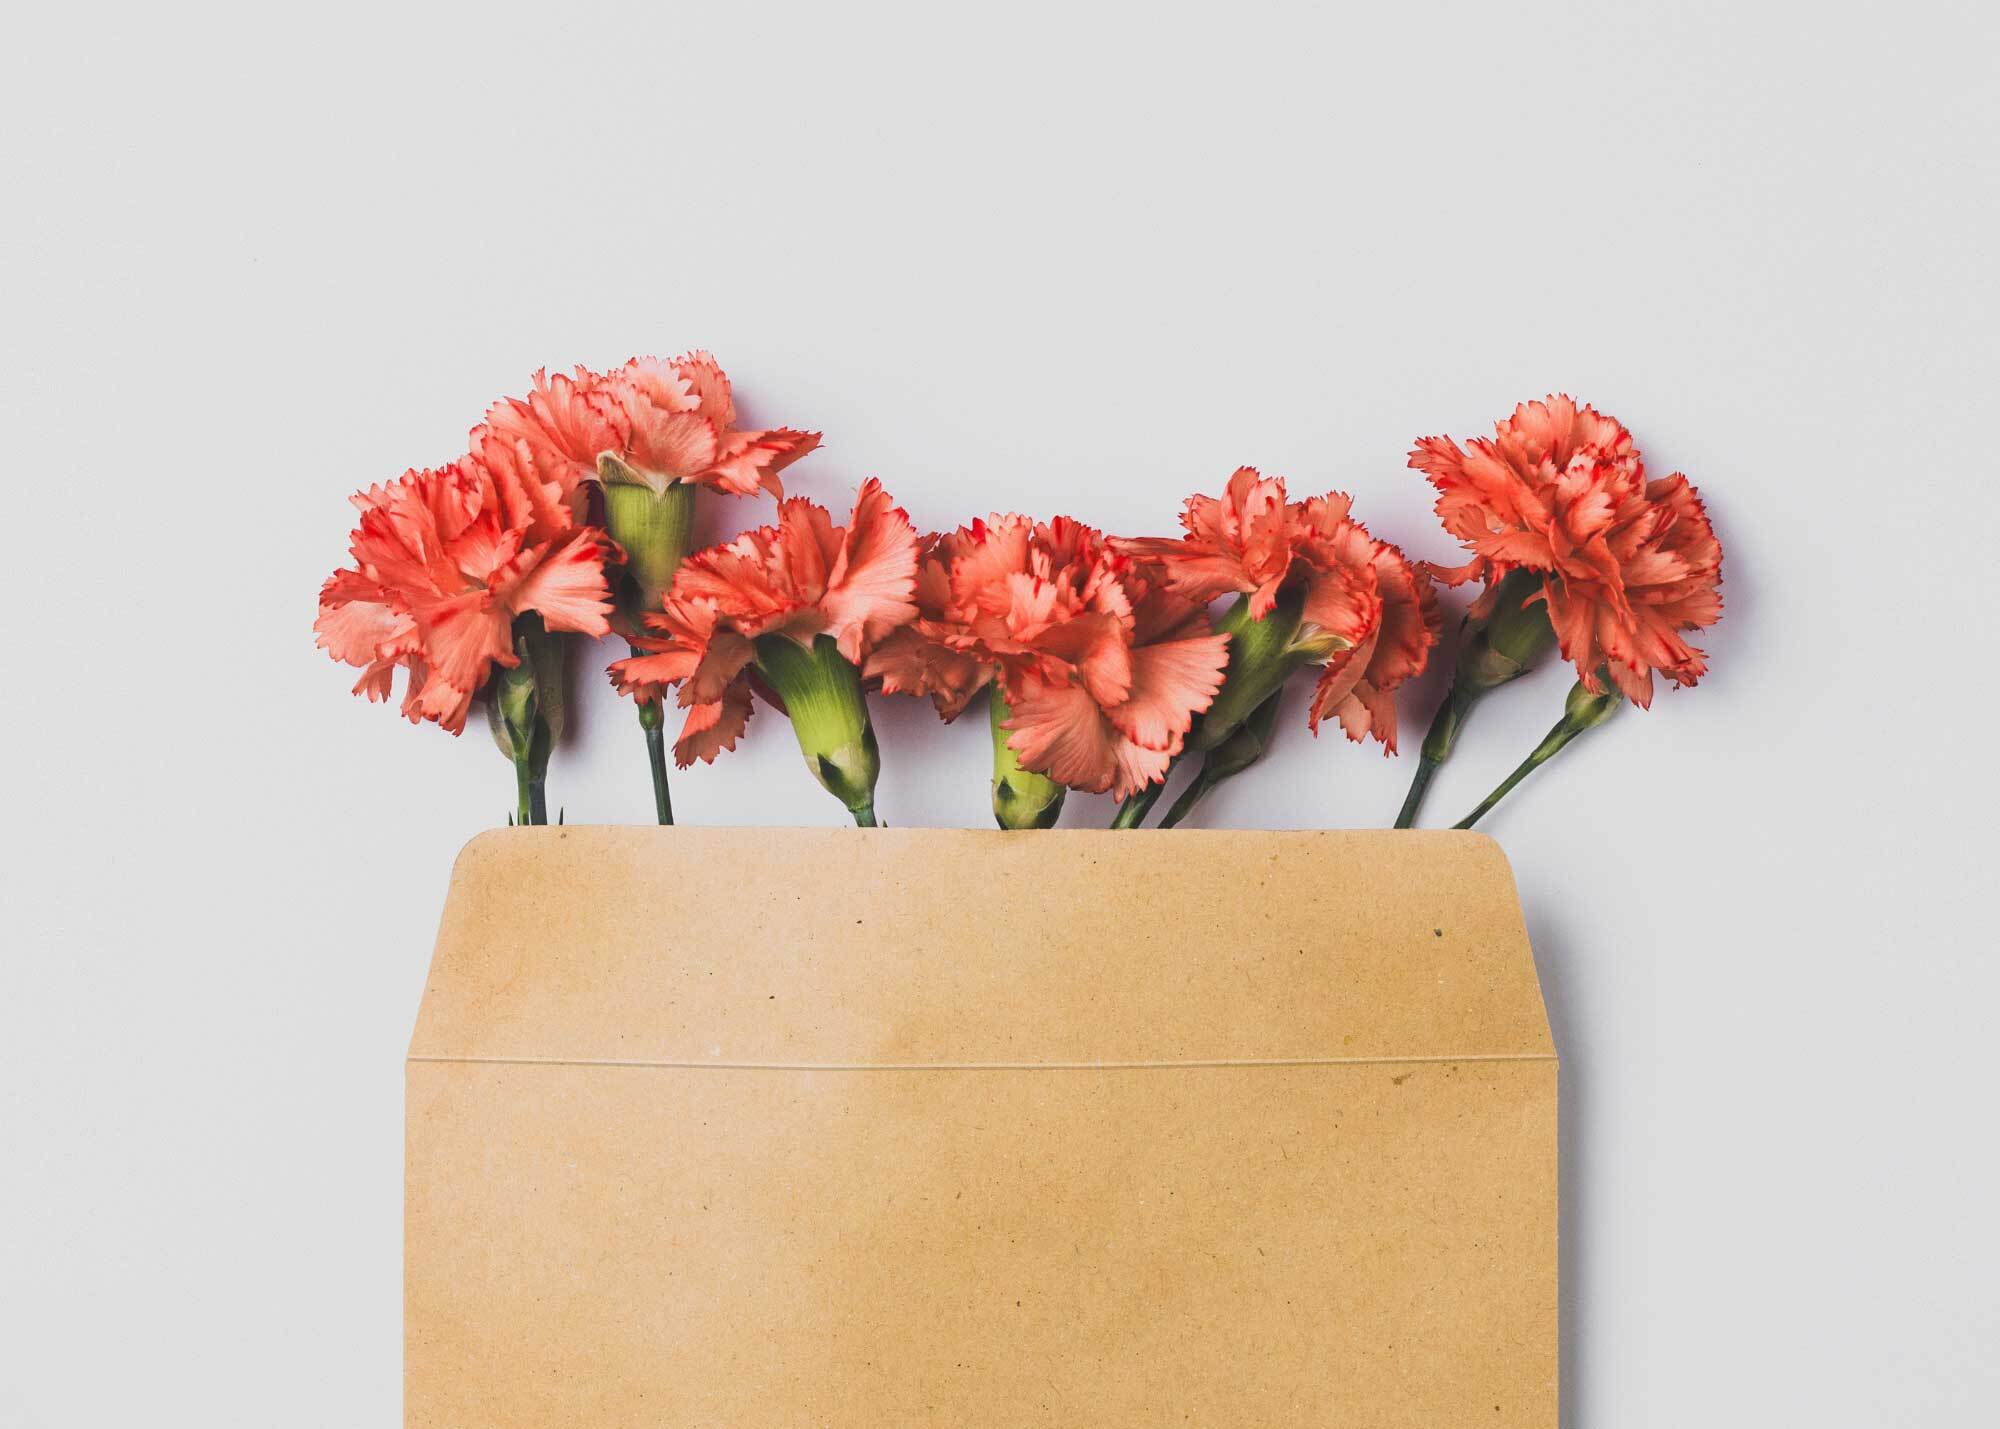 Flowers coming out of an envelope